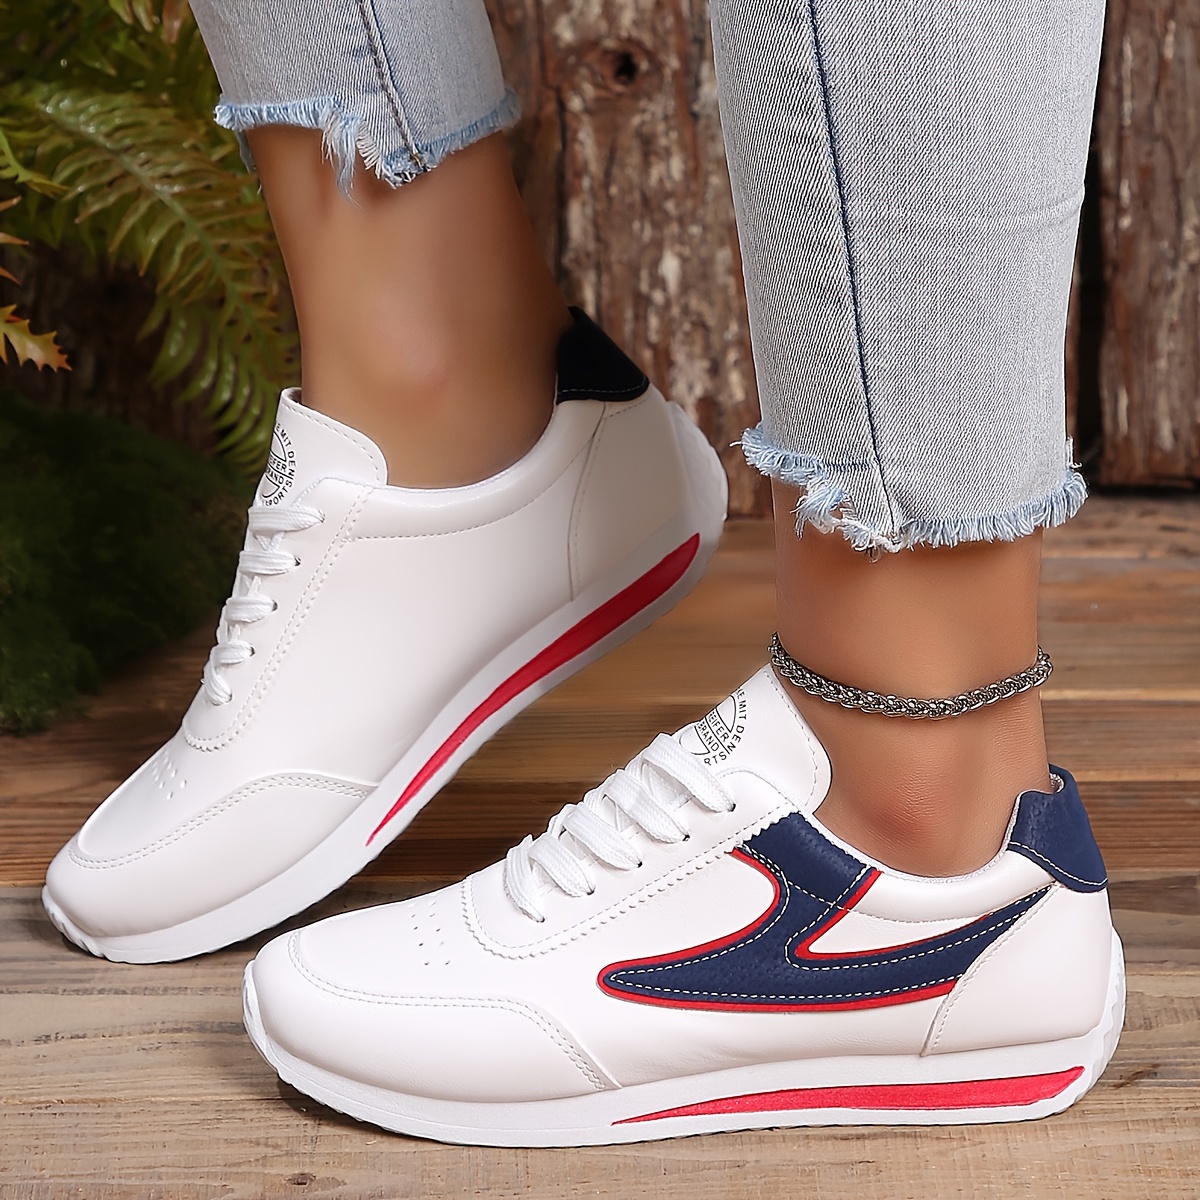 simple flat sneakers women s casual lace outdoor shoes details 2